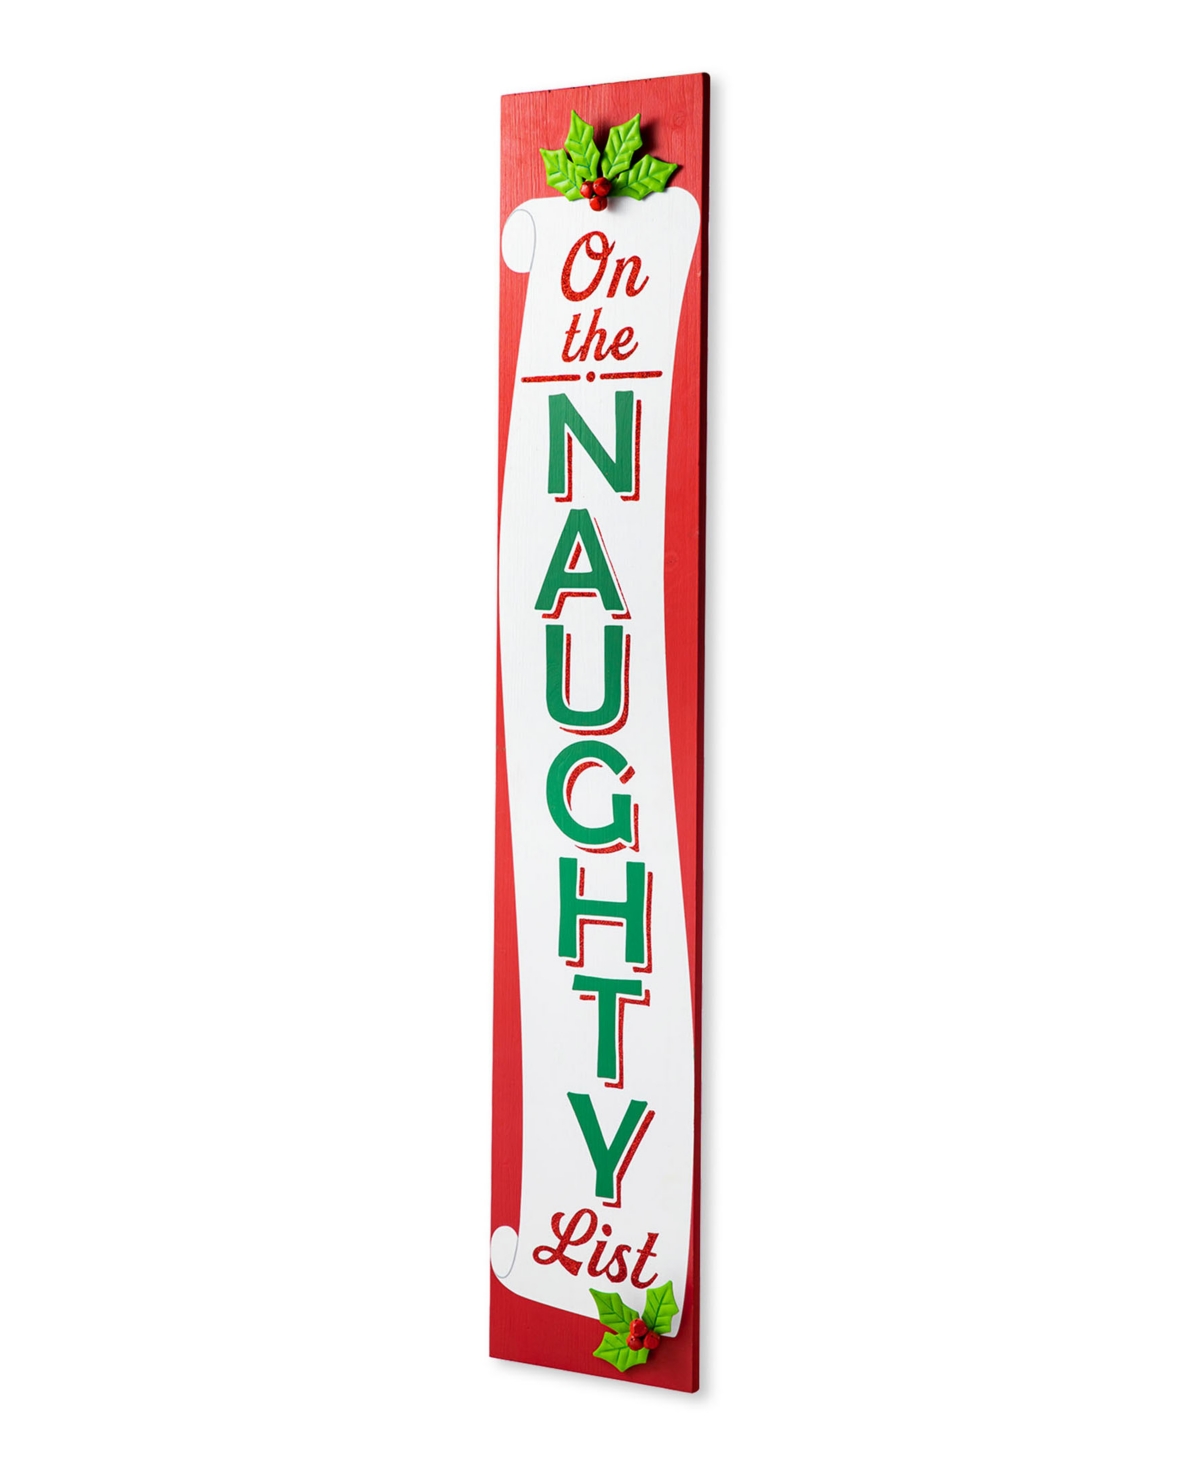 42"H Double Sided Christmas Wooden "On the Naughty/Nice List" Porch Sign - MULTI